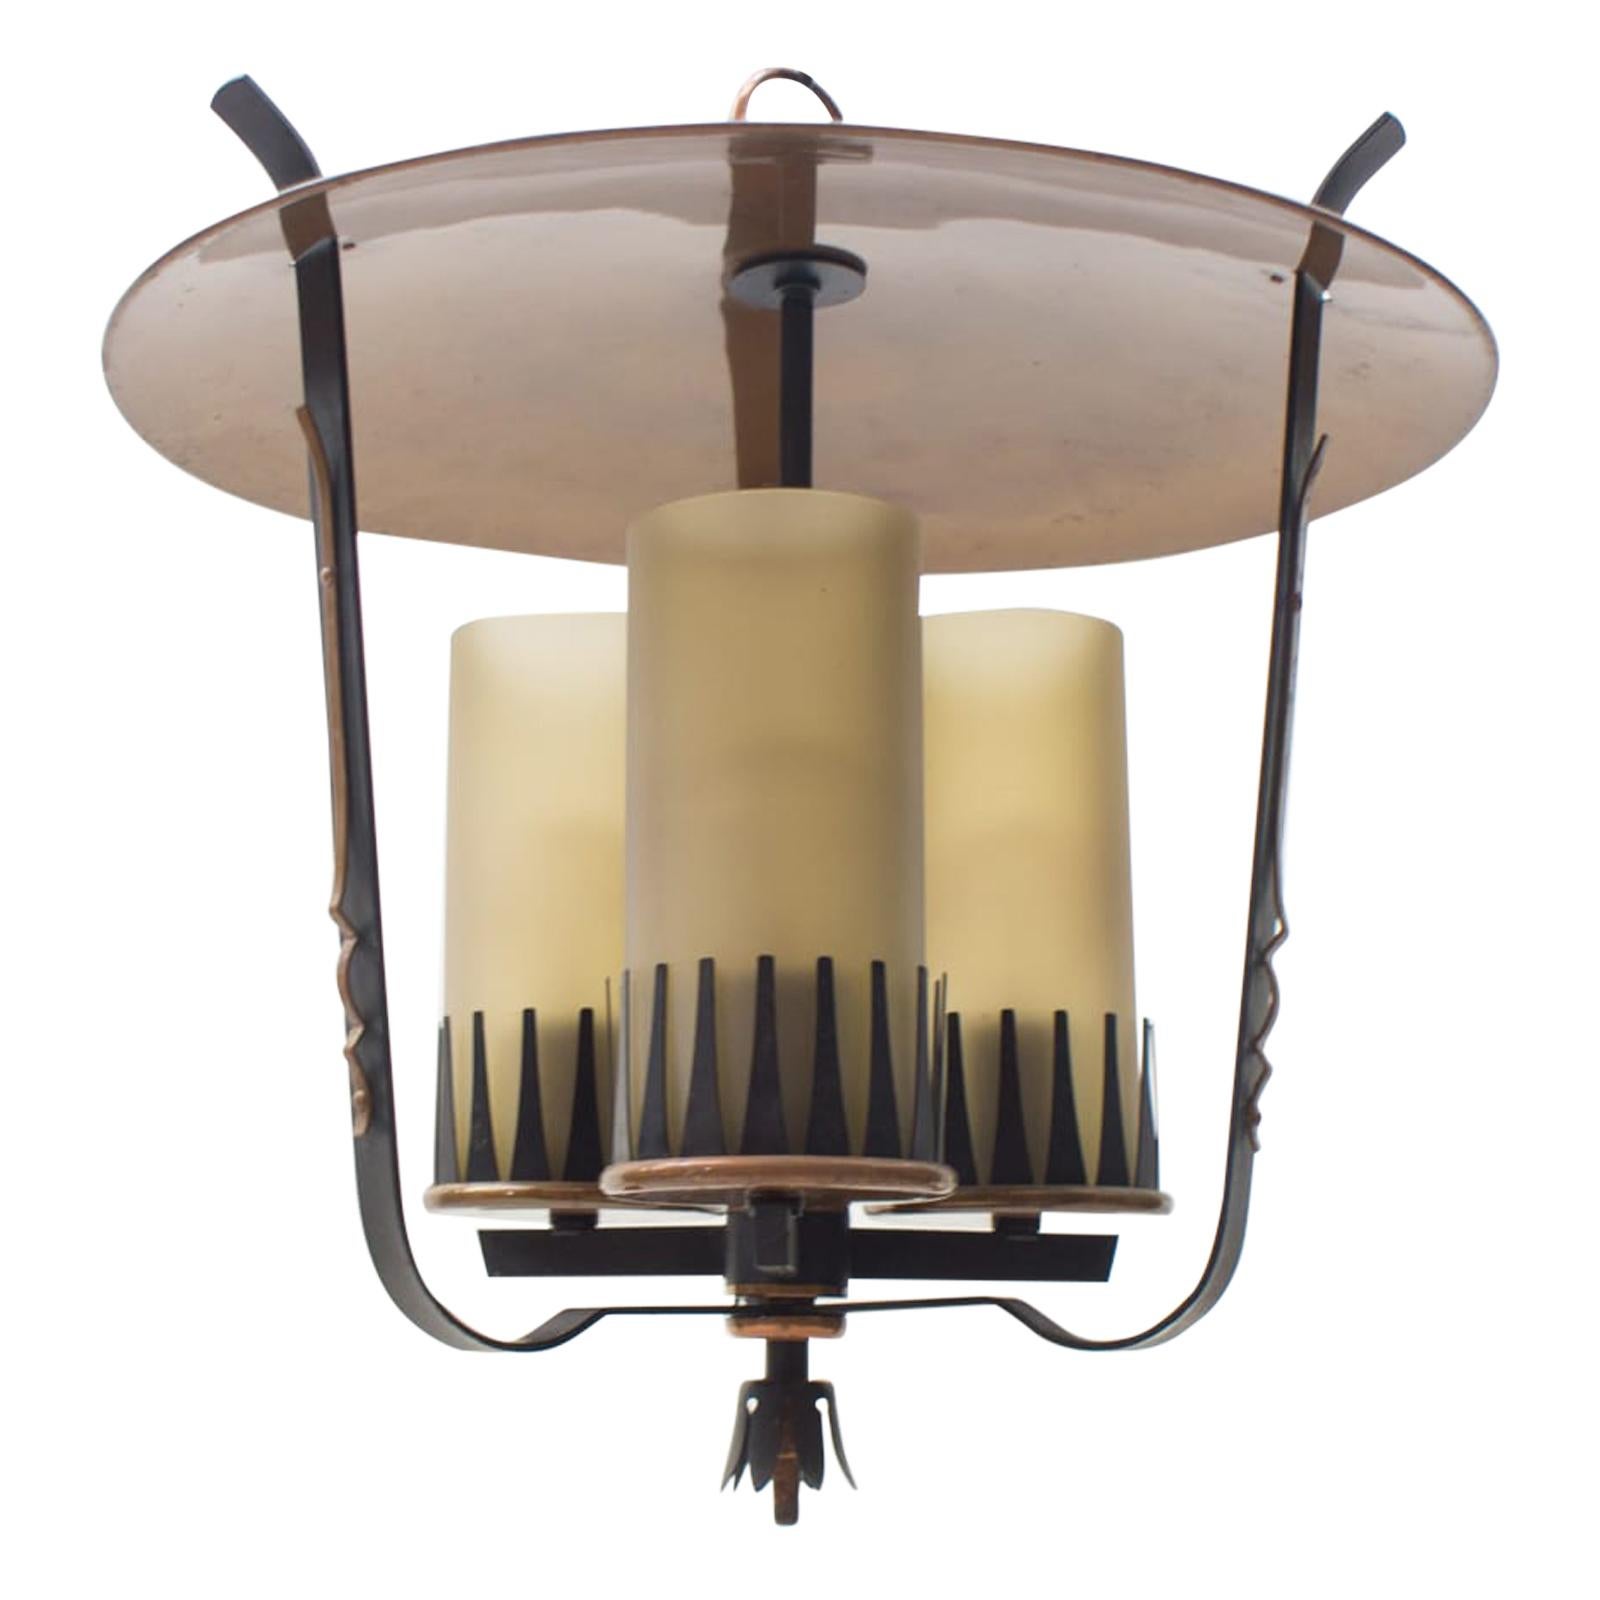 Very Rare Midcentury Pendant Lamp in Copper and Satinized Cylindrical Glass